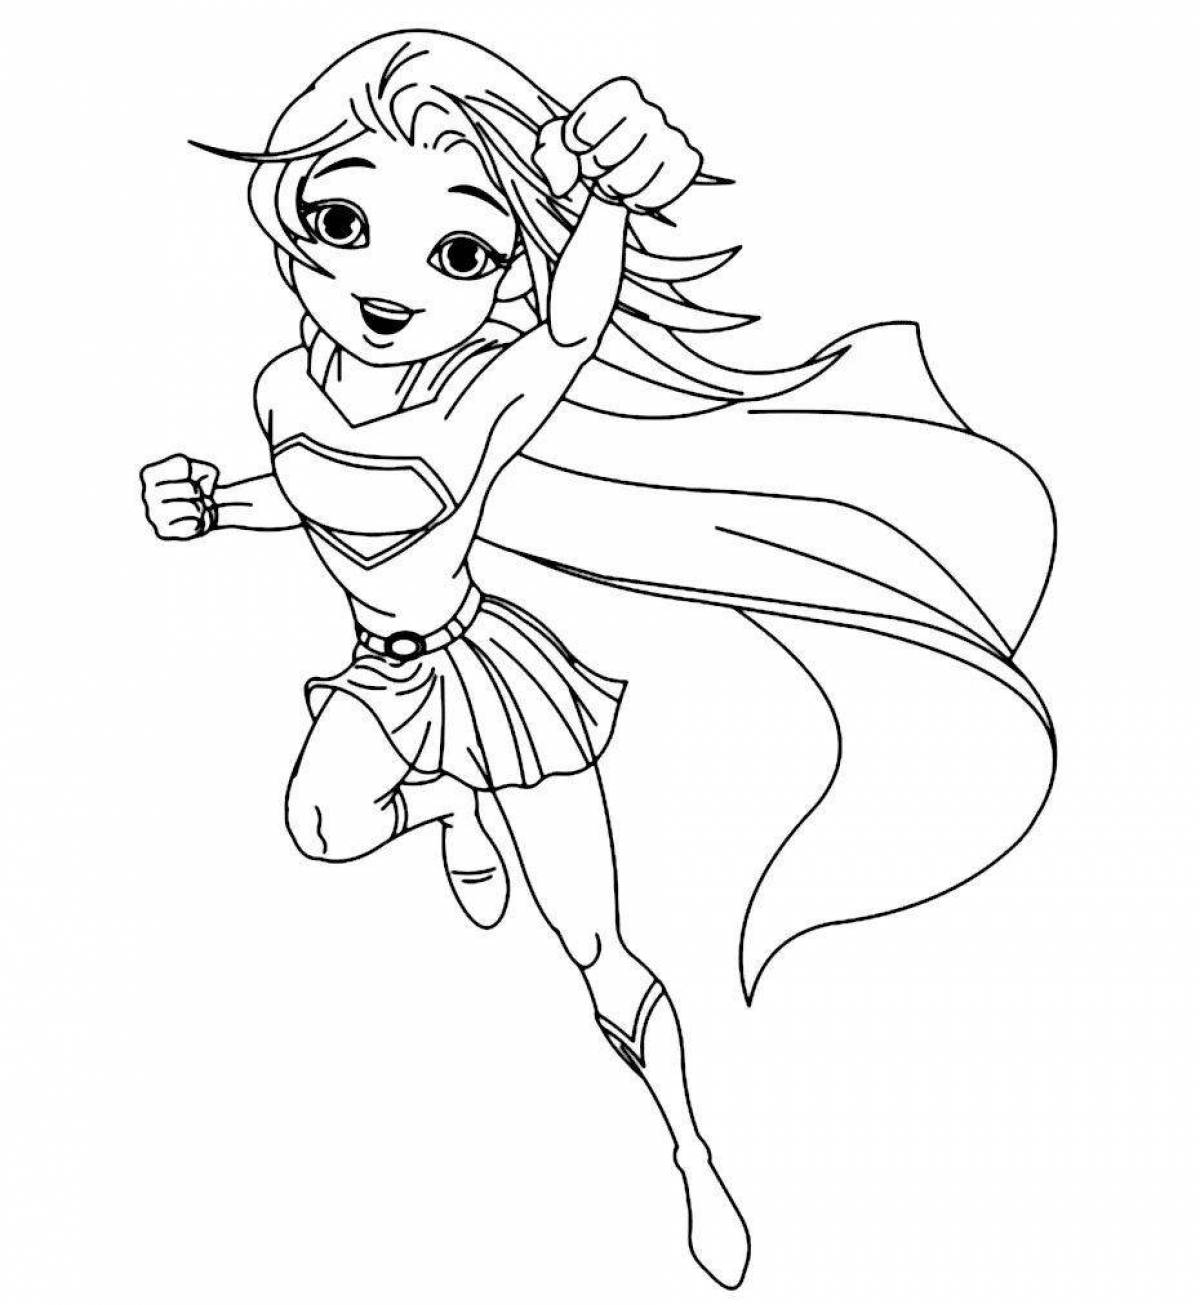 Playful super girl coloring page